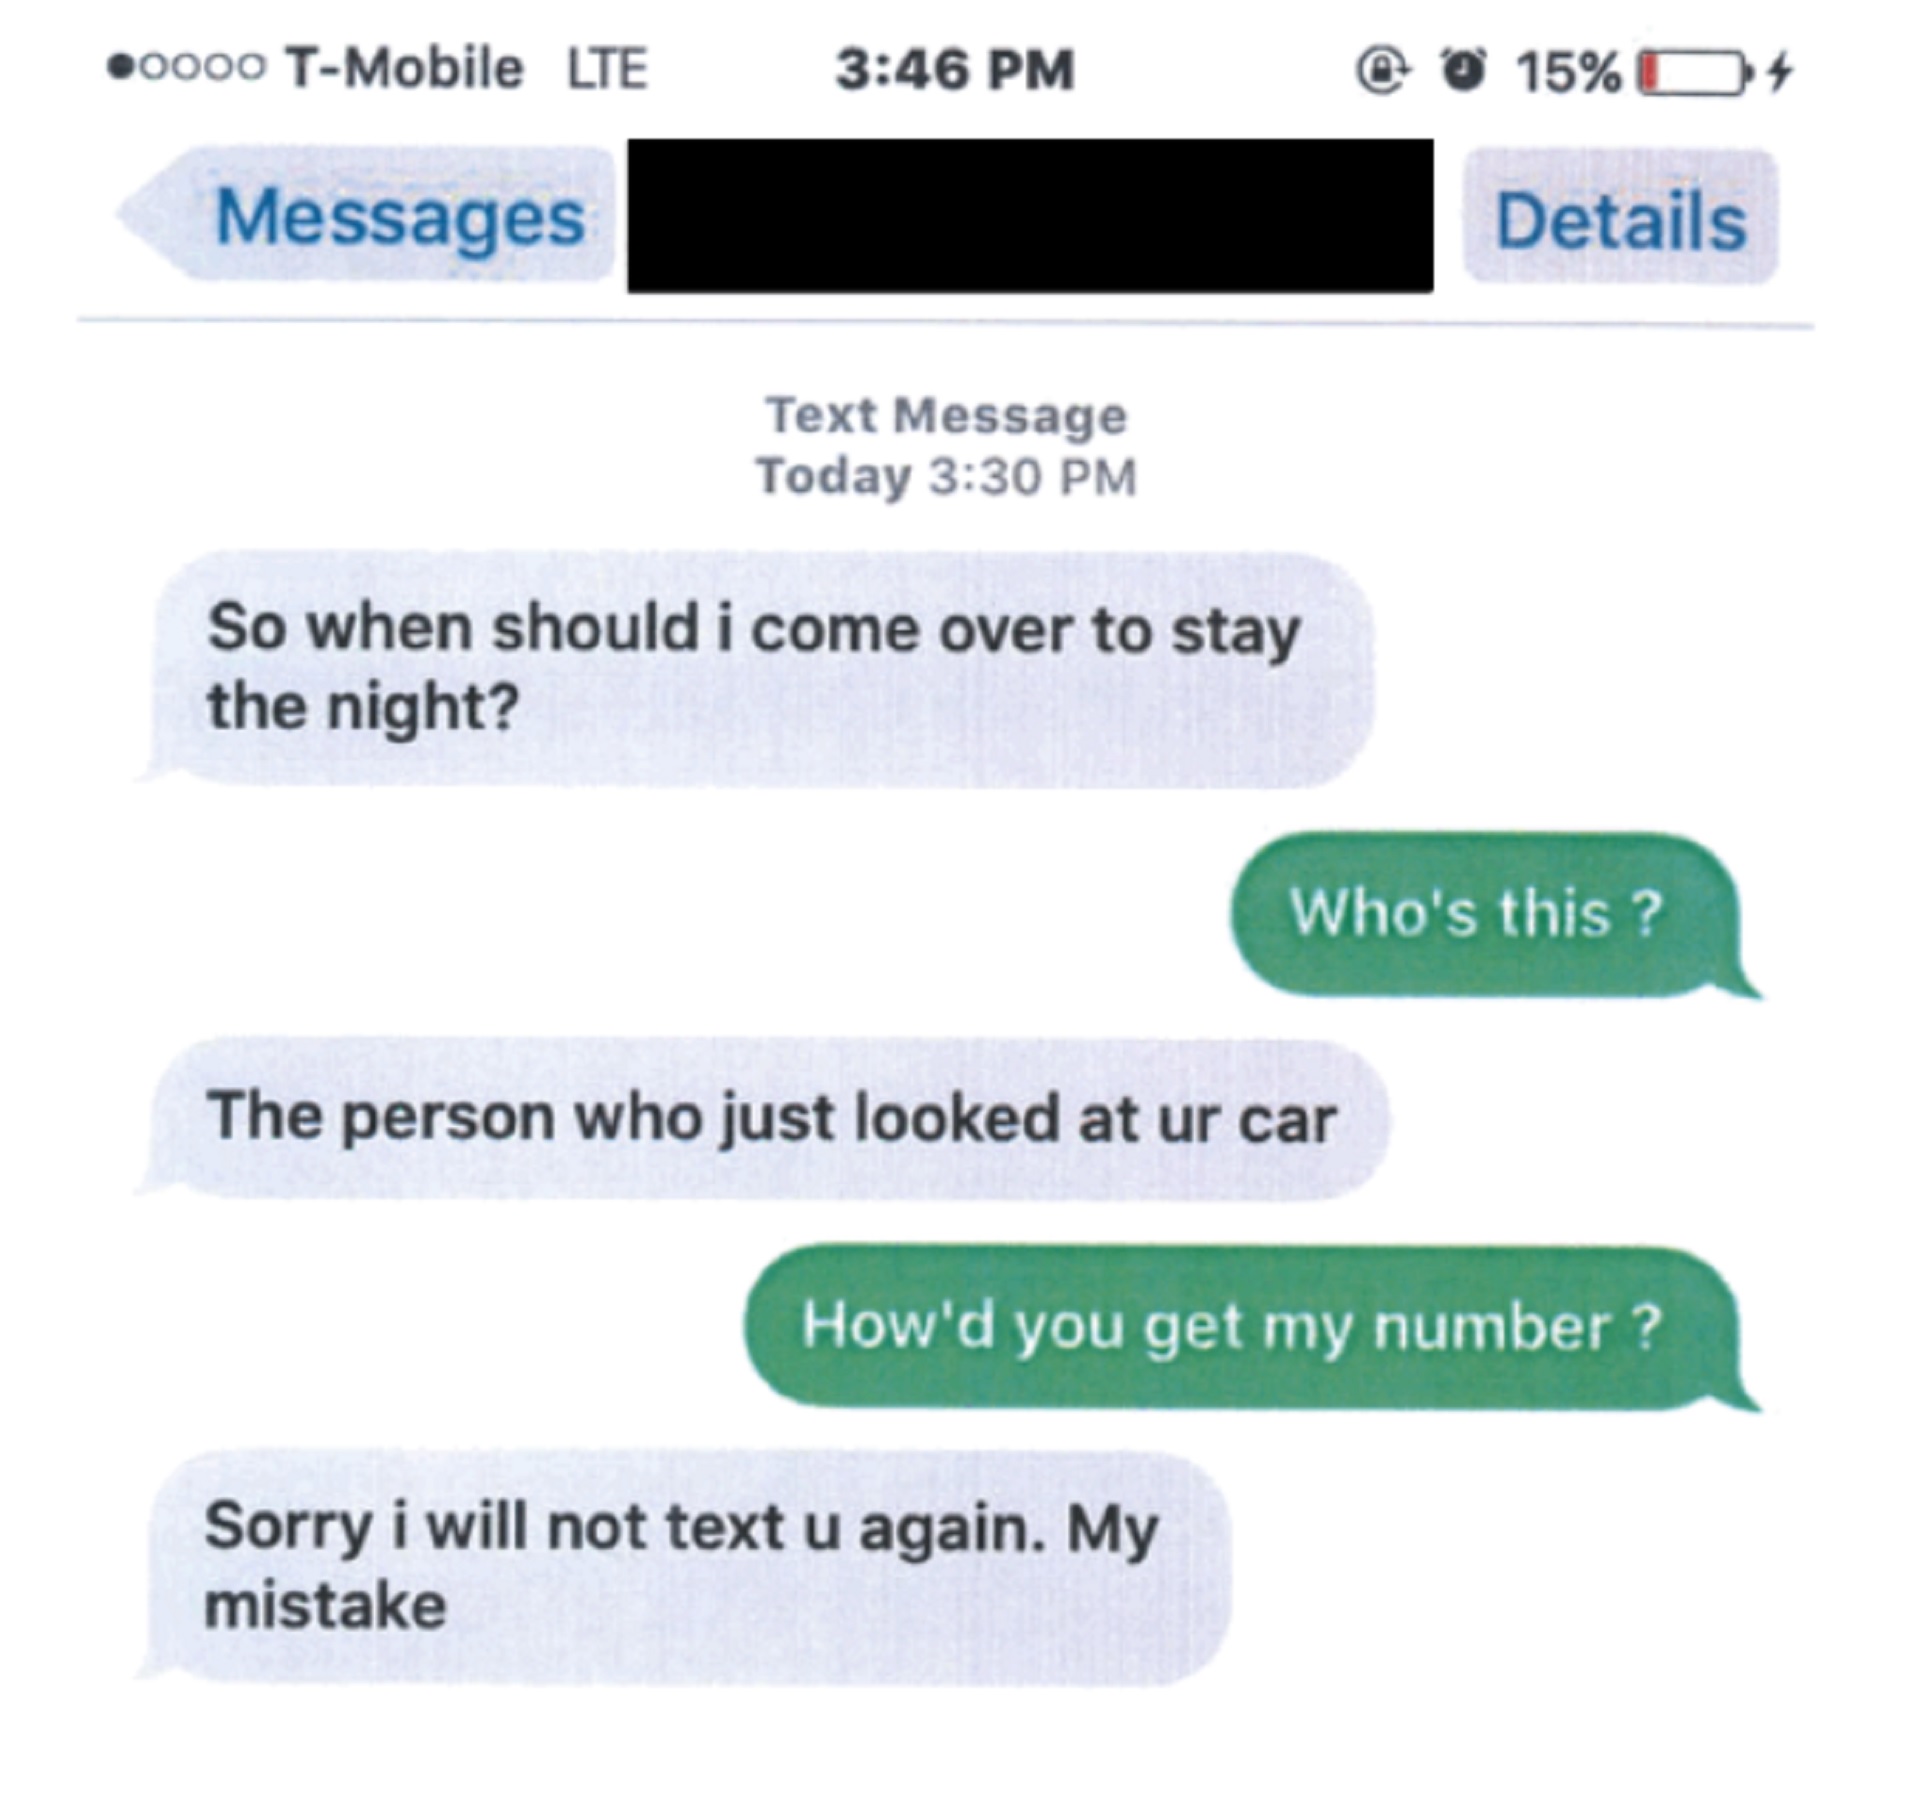 The image shows text messages sent by a former CHP Officer to a woman whose vehicle he had just inspected. The officer texted, "So when should i come over to stay the night?" Response: "Who's this ?" Officer: "The person who just looked at ur car" Response: "How'd you get my number ?" Officer: "Sorry i will not text u again. My mistake"